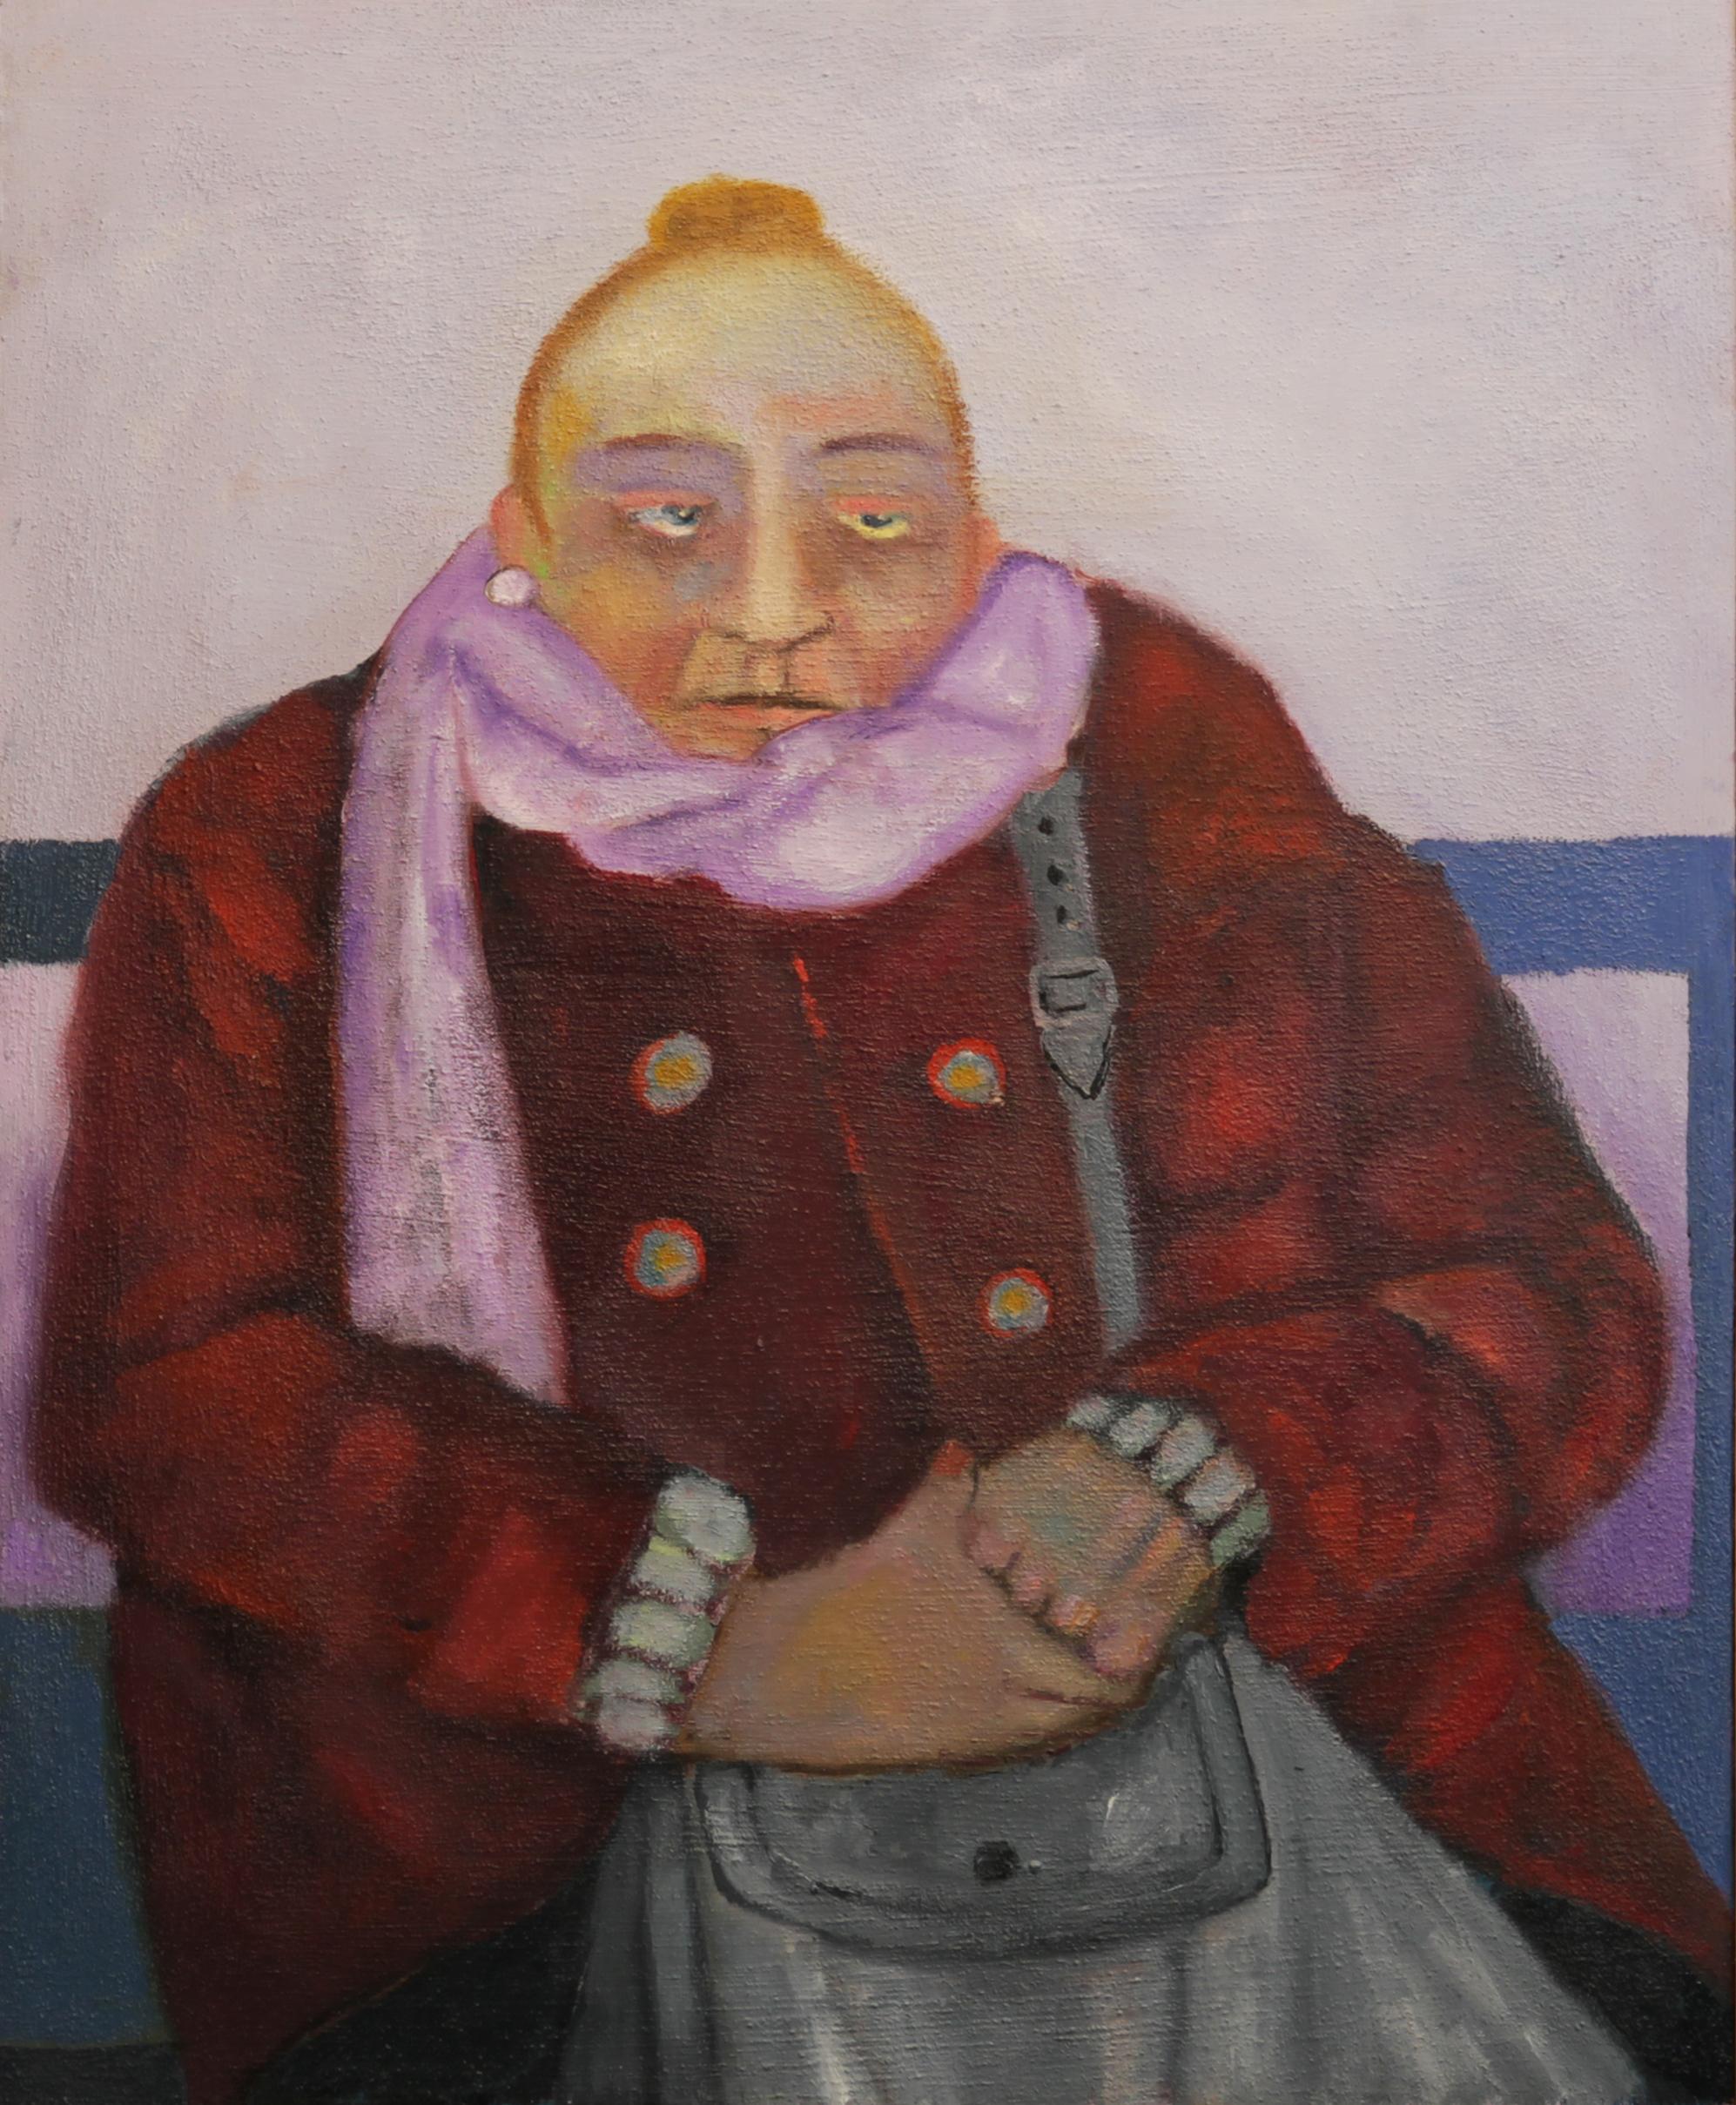 Stephen Basso Figurative Painting - COLD SNAP  seated female figure on subway cool blue winter tones